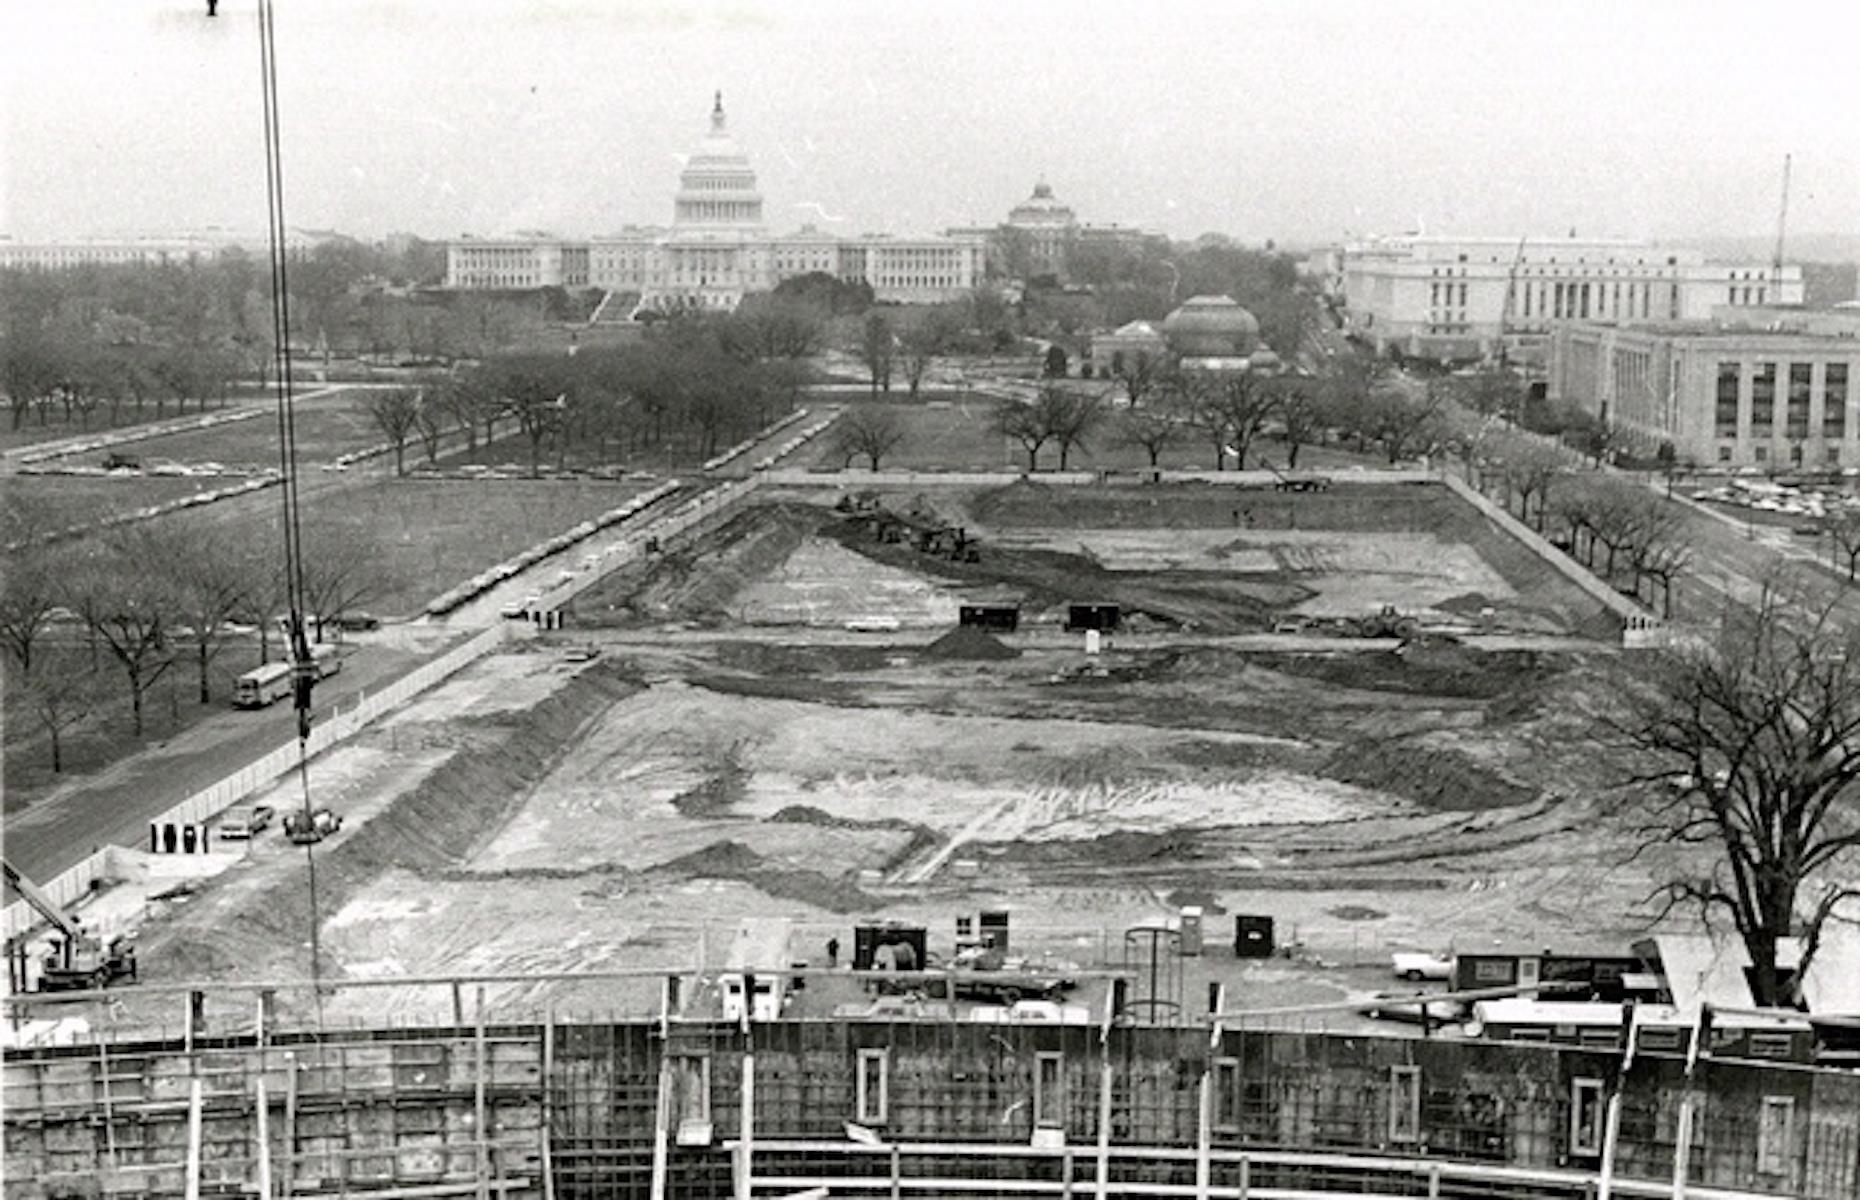 <p>Construction of the flagship building of the Smithsonian National Air and Space Museum started on the Mall in Washington DC in the early 1970s and it was inaugurated in 1976. It has the world’s largest collection of historic aircraft and spacecraft. The five millionth visitor crossed its threshold just six months later. Today, the National Air and Space Museum is one of the most-visited museums in the world with more than 8.6 million guests annually. Discover <a href="https://www.loveexploring.com/news/83589/the-worlds-best-space-museums">more of the world's best space museums here</a>.</p>